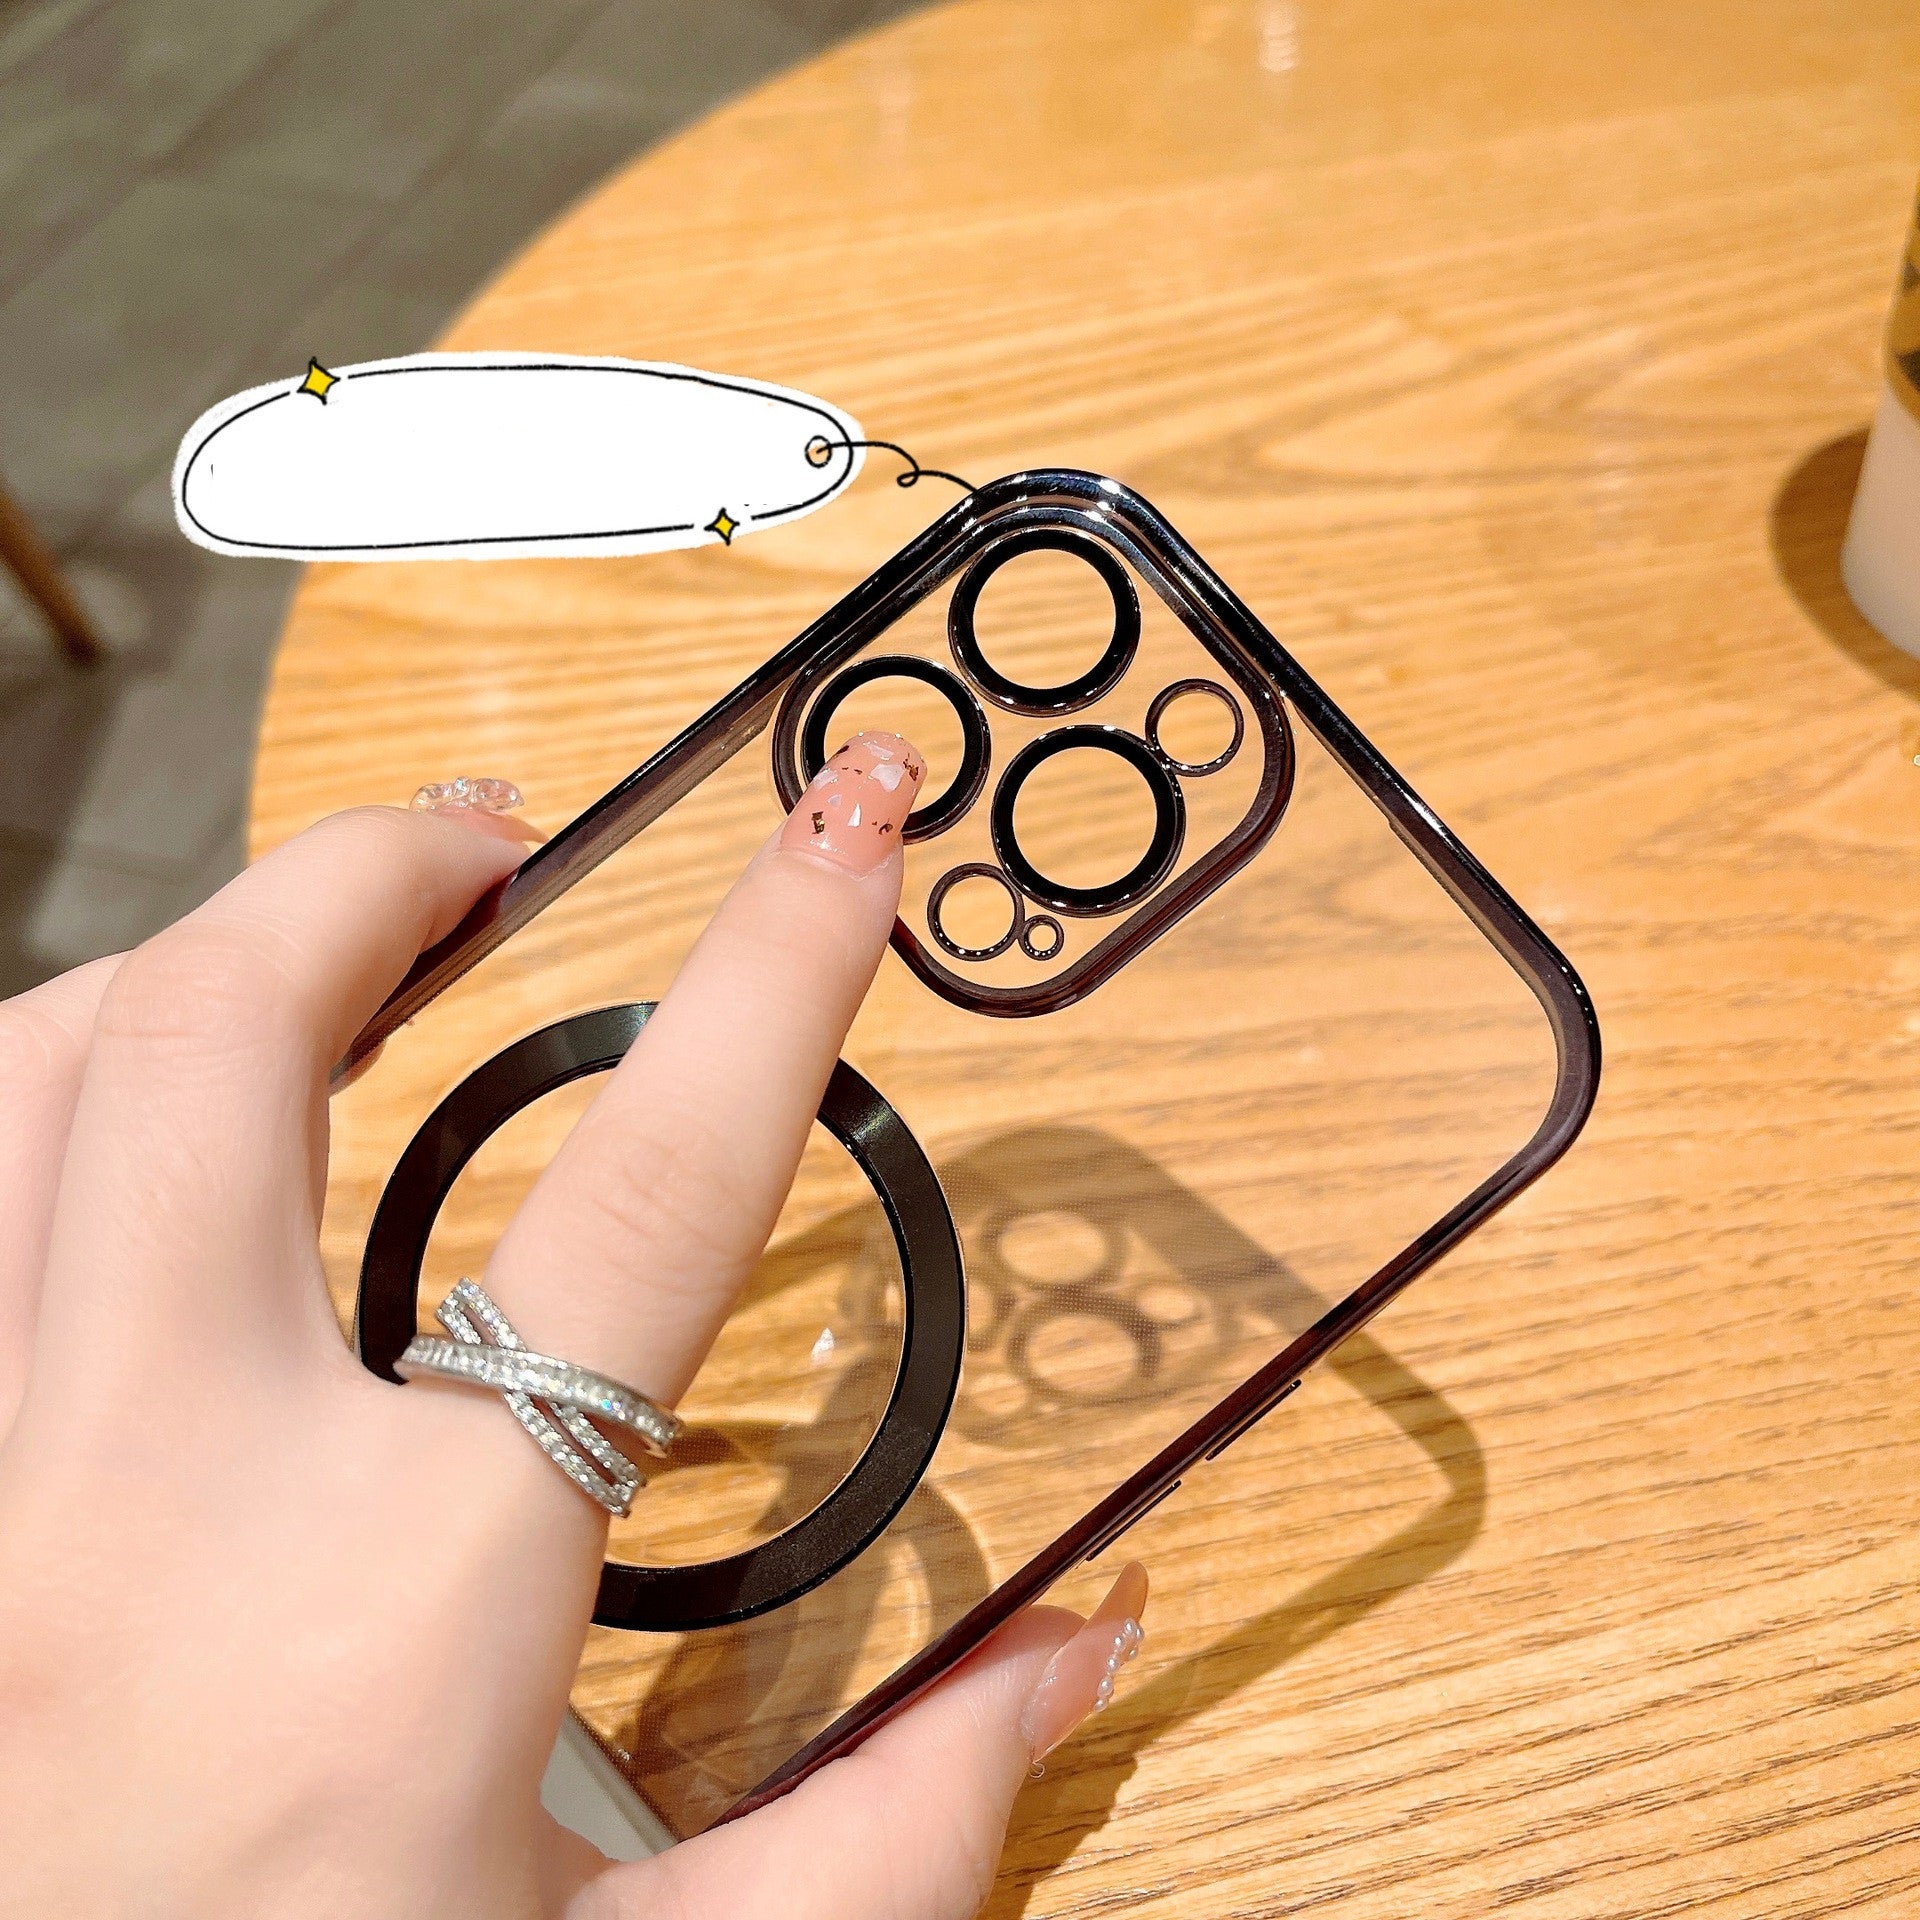 magnetic iphone case